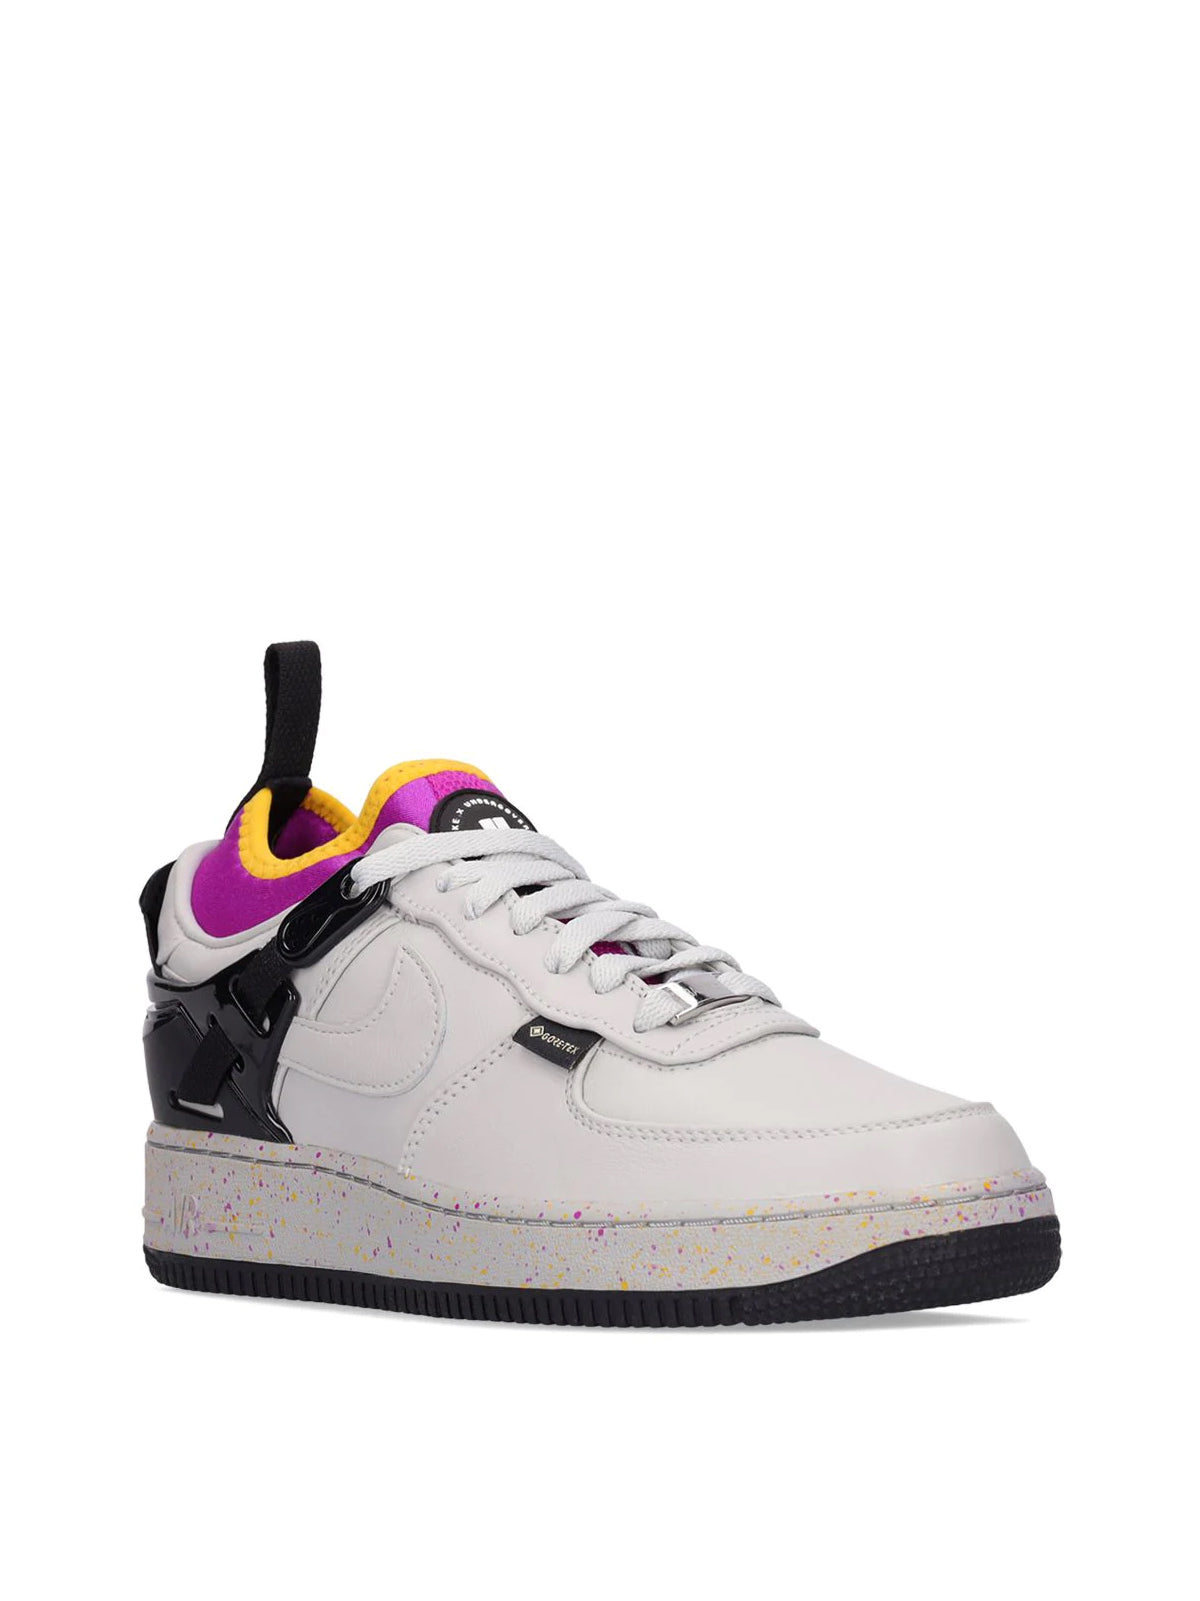 Nike-OUTLET-SALE-Air Force 1 Low SP x Undercover GORE-TEX Sneakers-ARCHIVIST